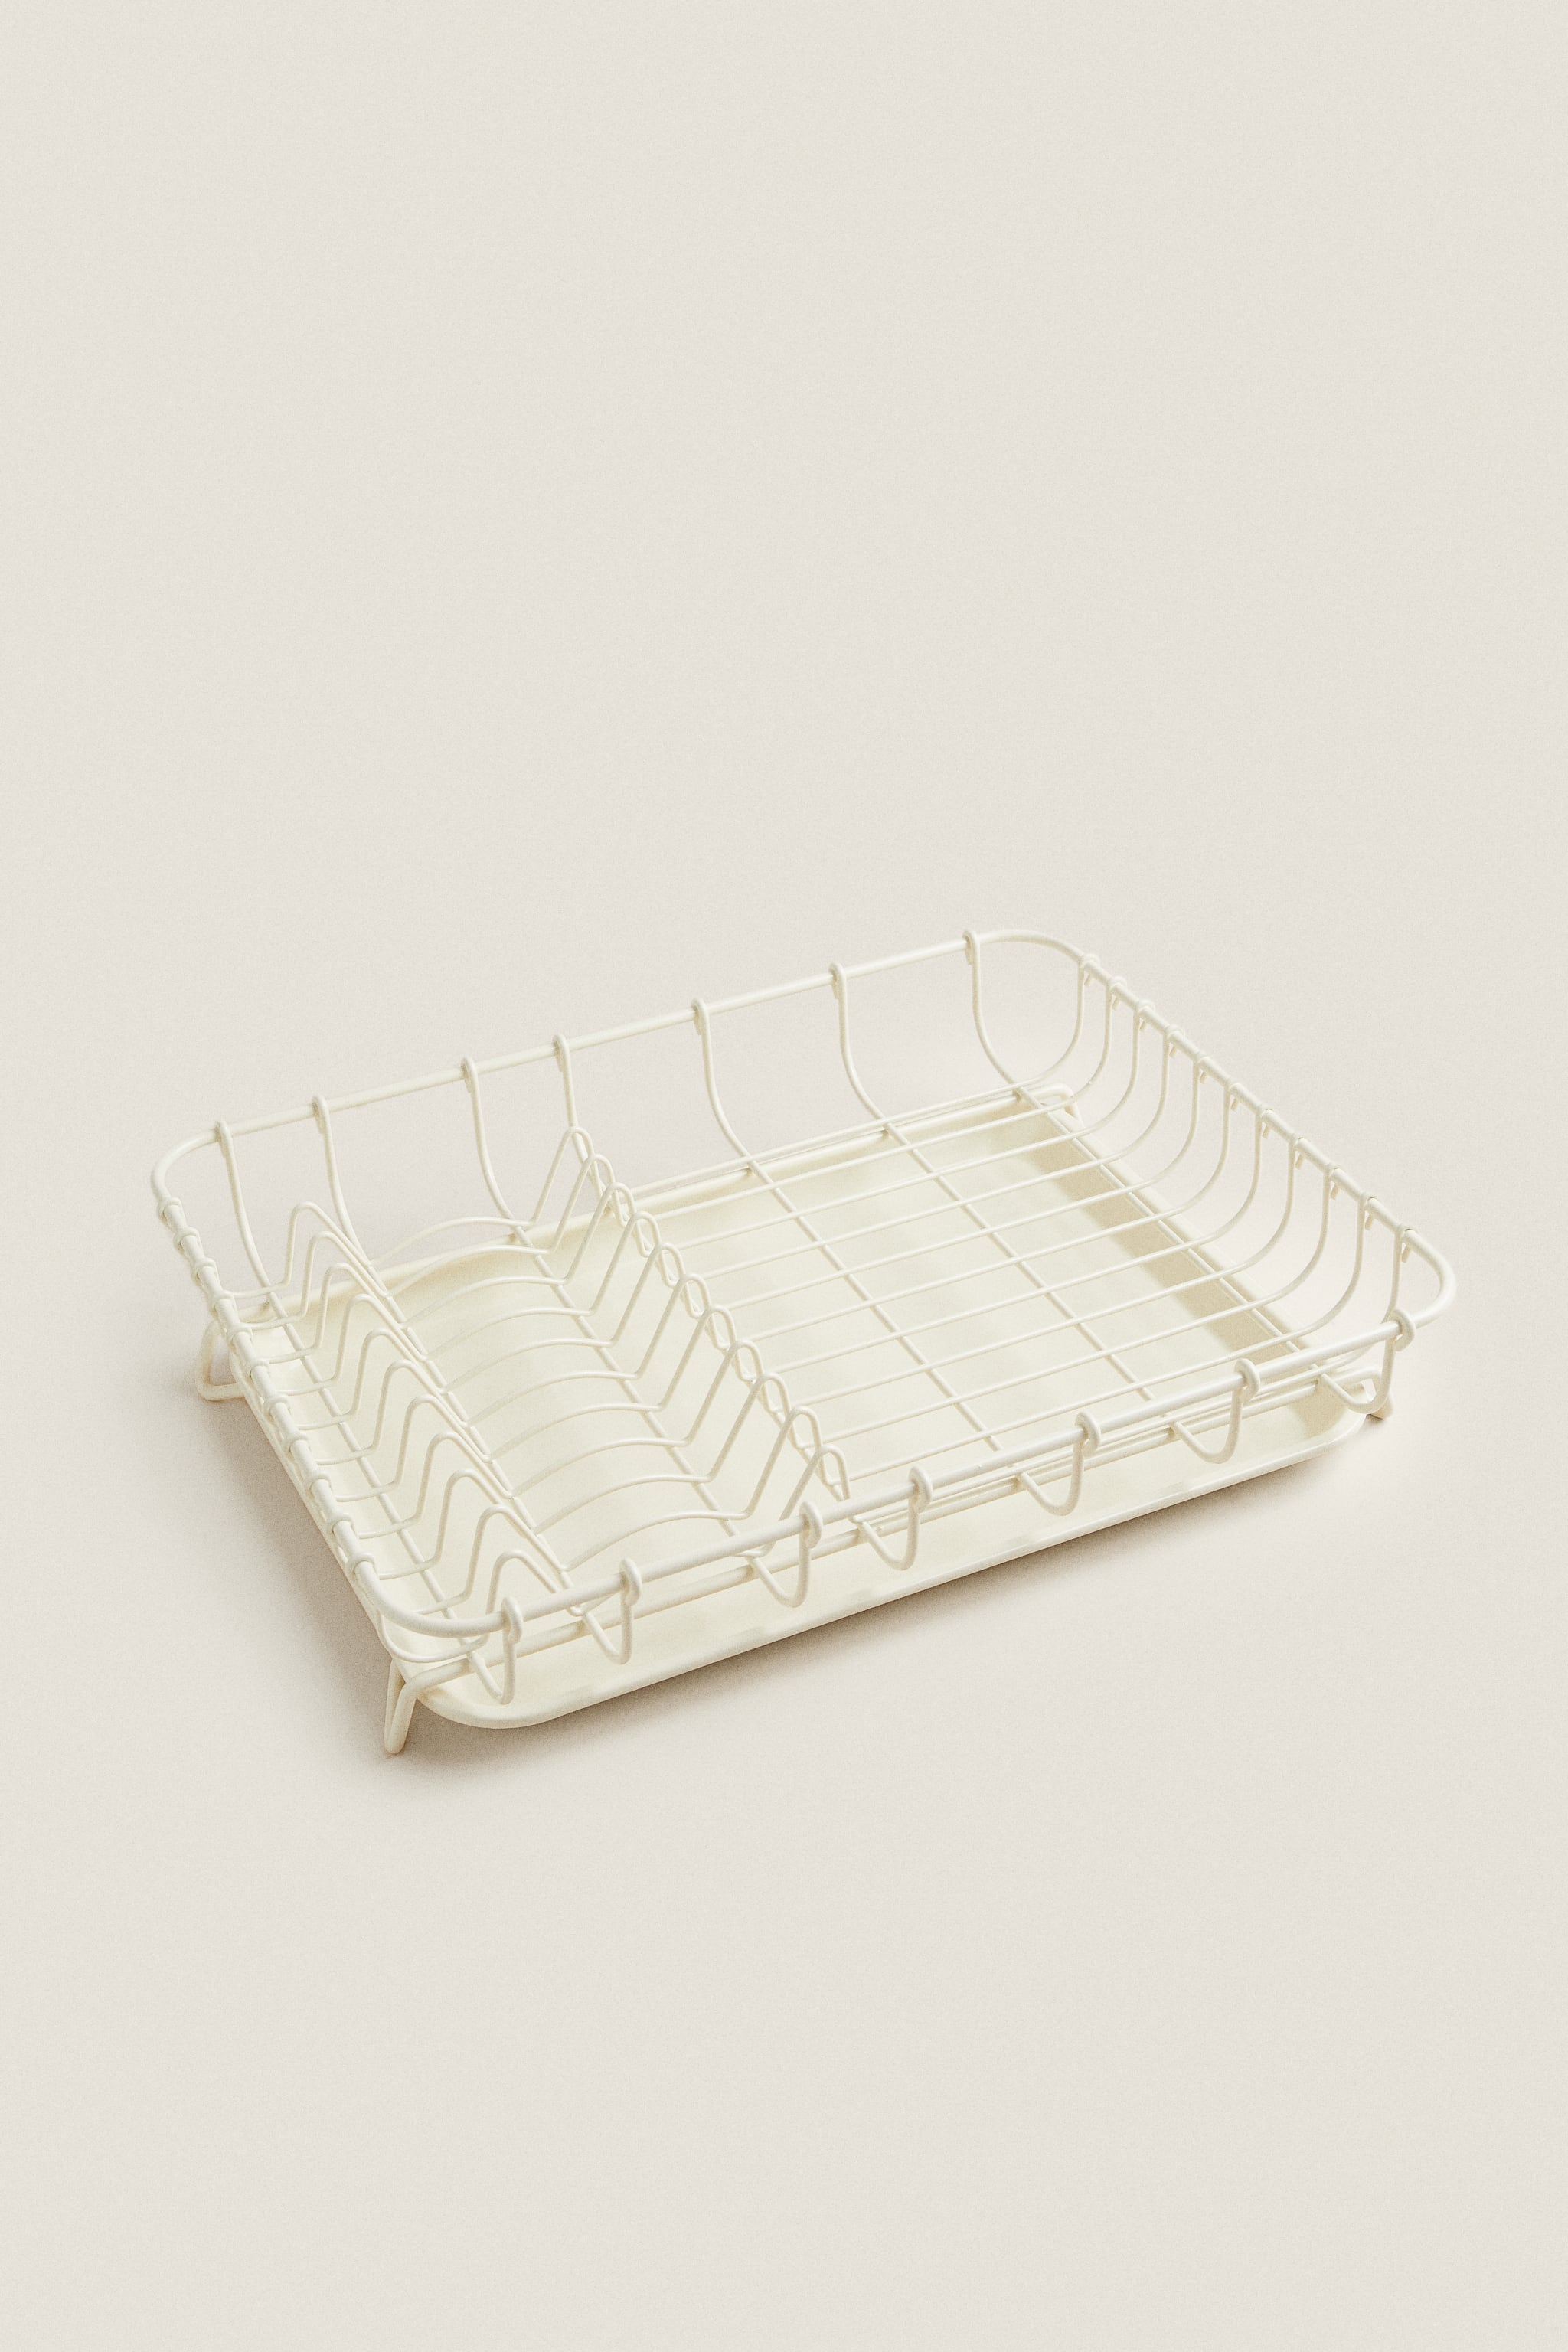 DISH RACK WITH TRAY